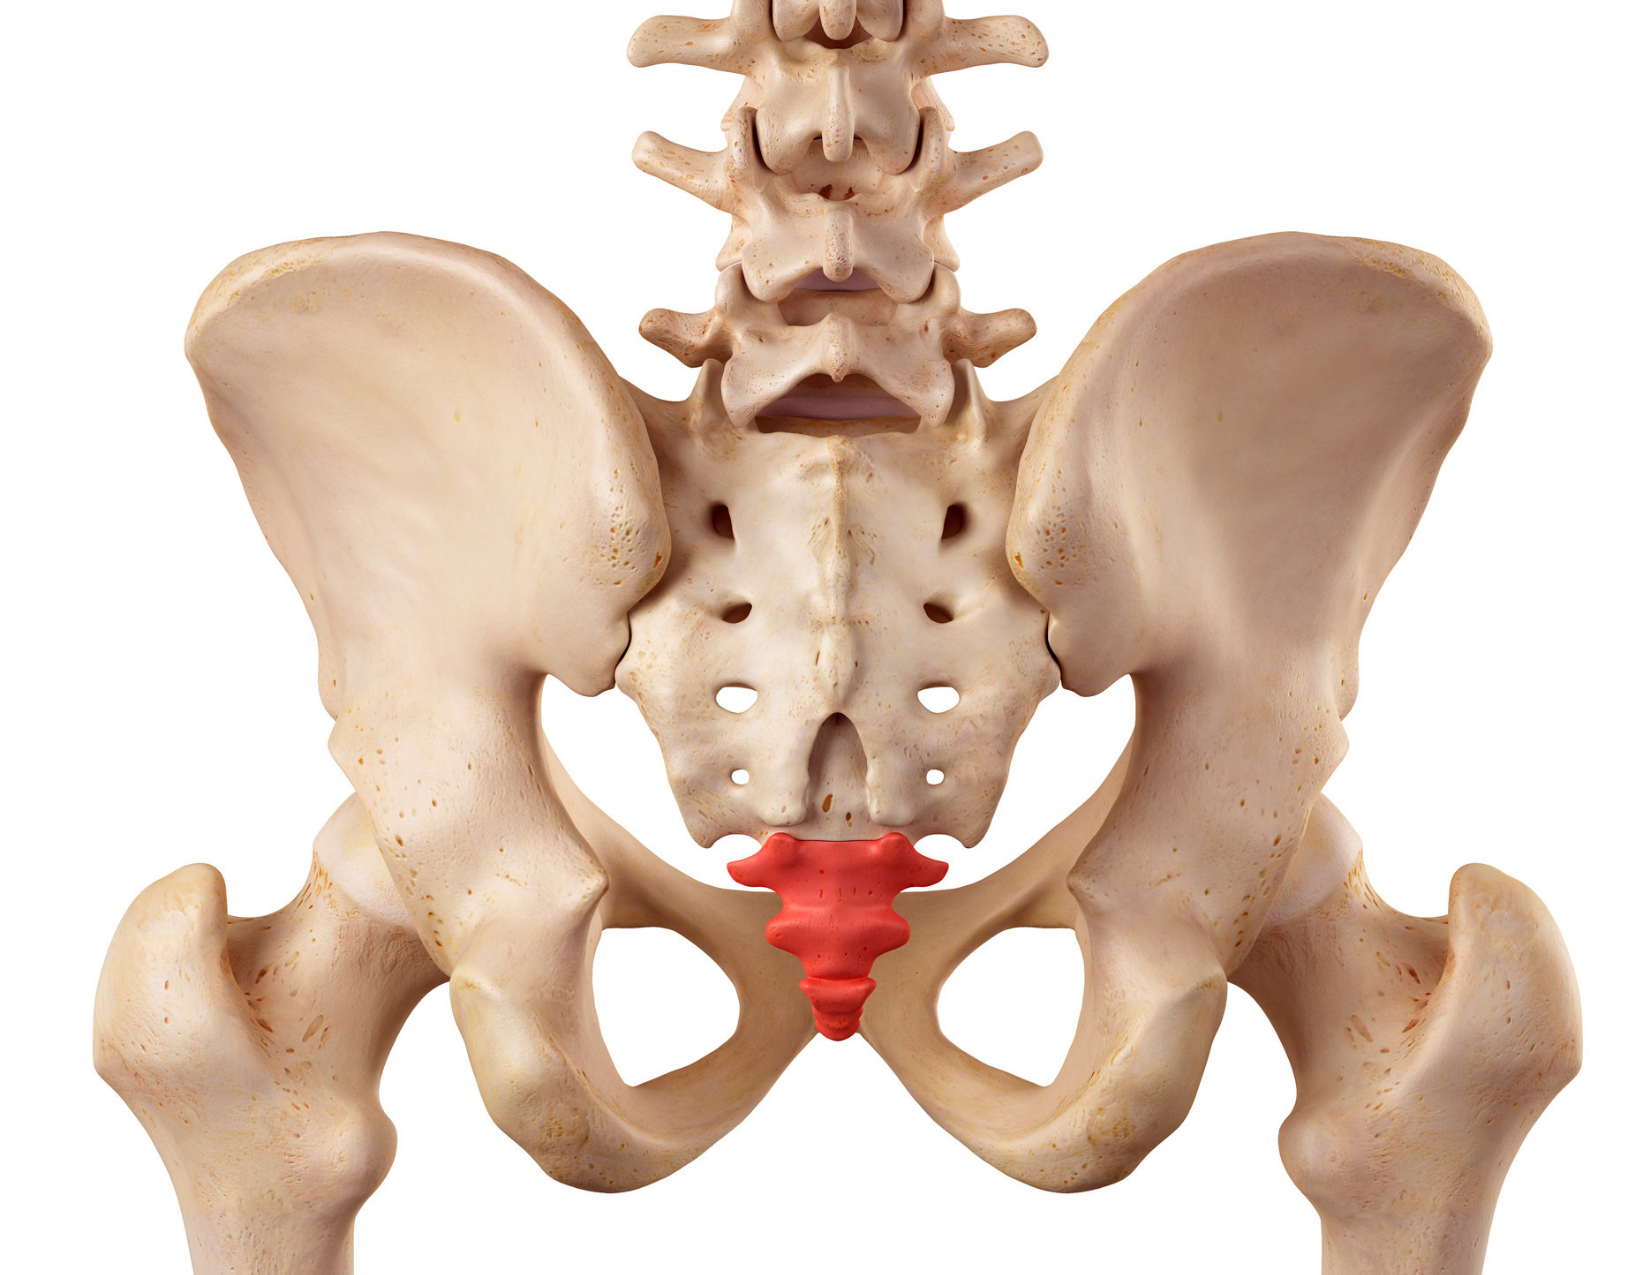 Tailbone Pain or Coccydynia : Causes and Treatment